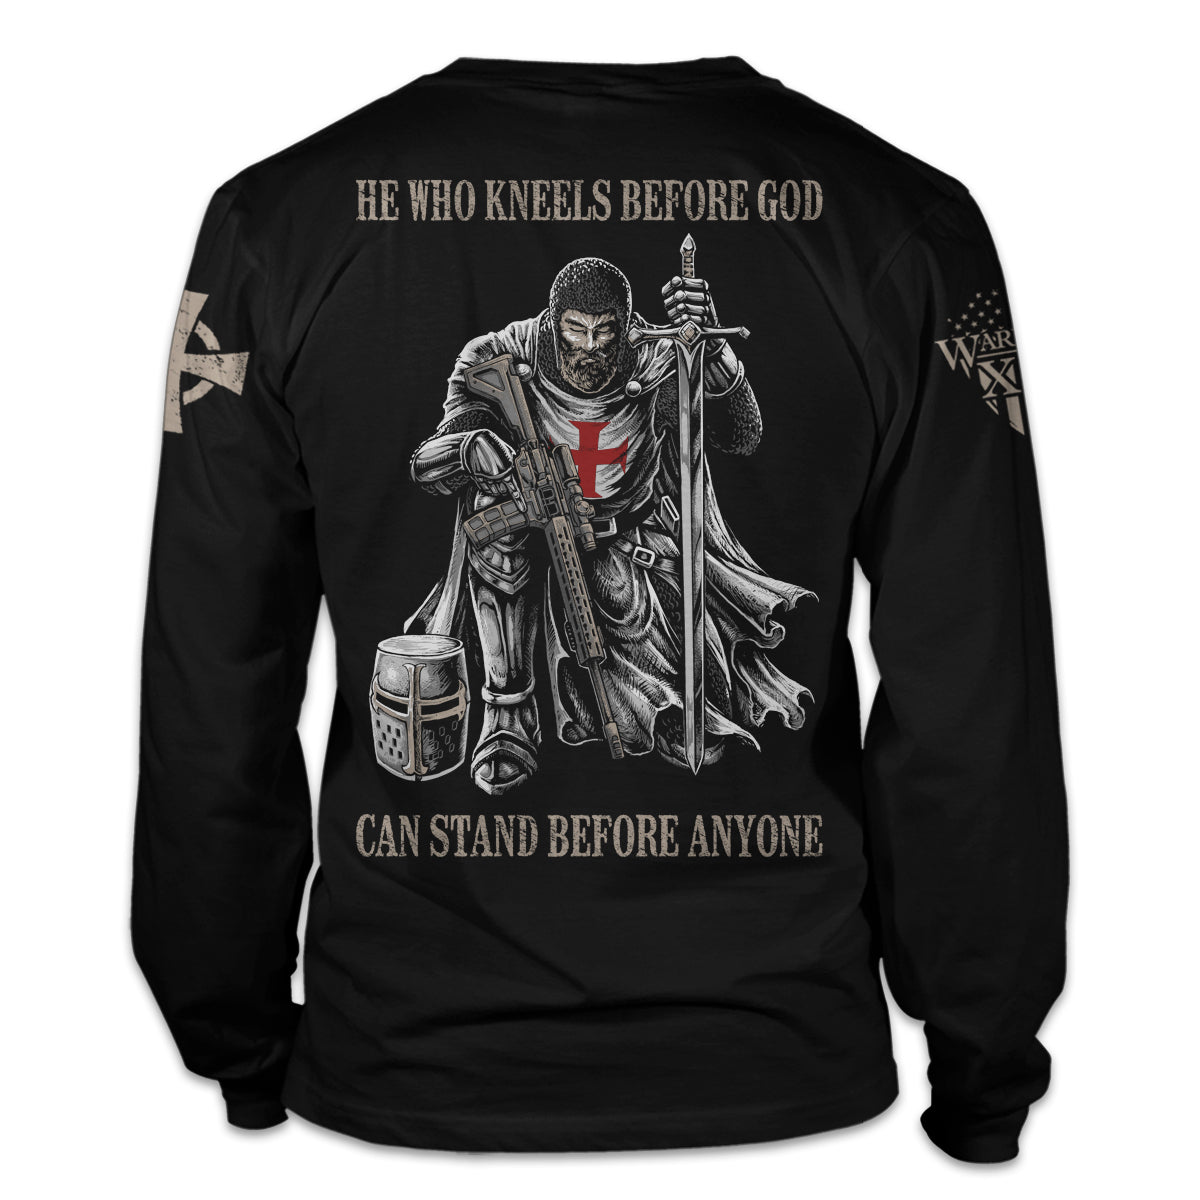 A black long sleeve shirt with the words "He who kneels before God can stand before anyone" with a knights templar kneeling holding a sword printed on the back of the shirt.